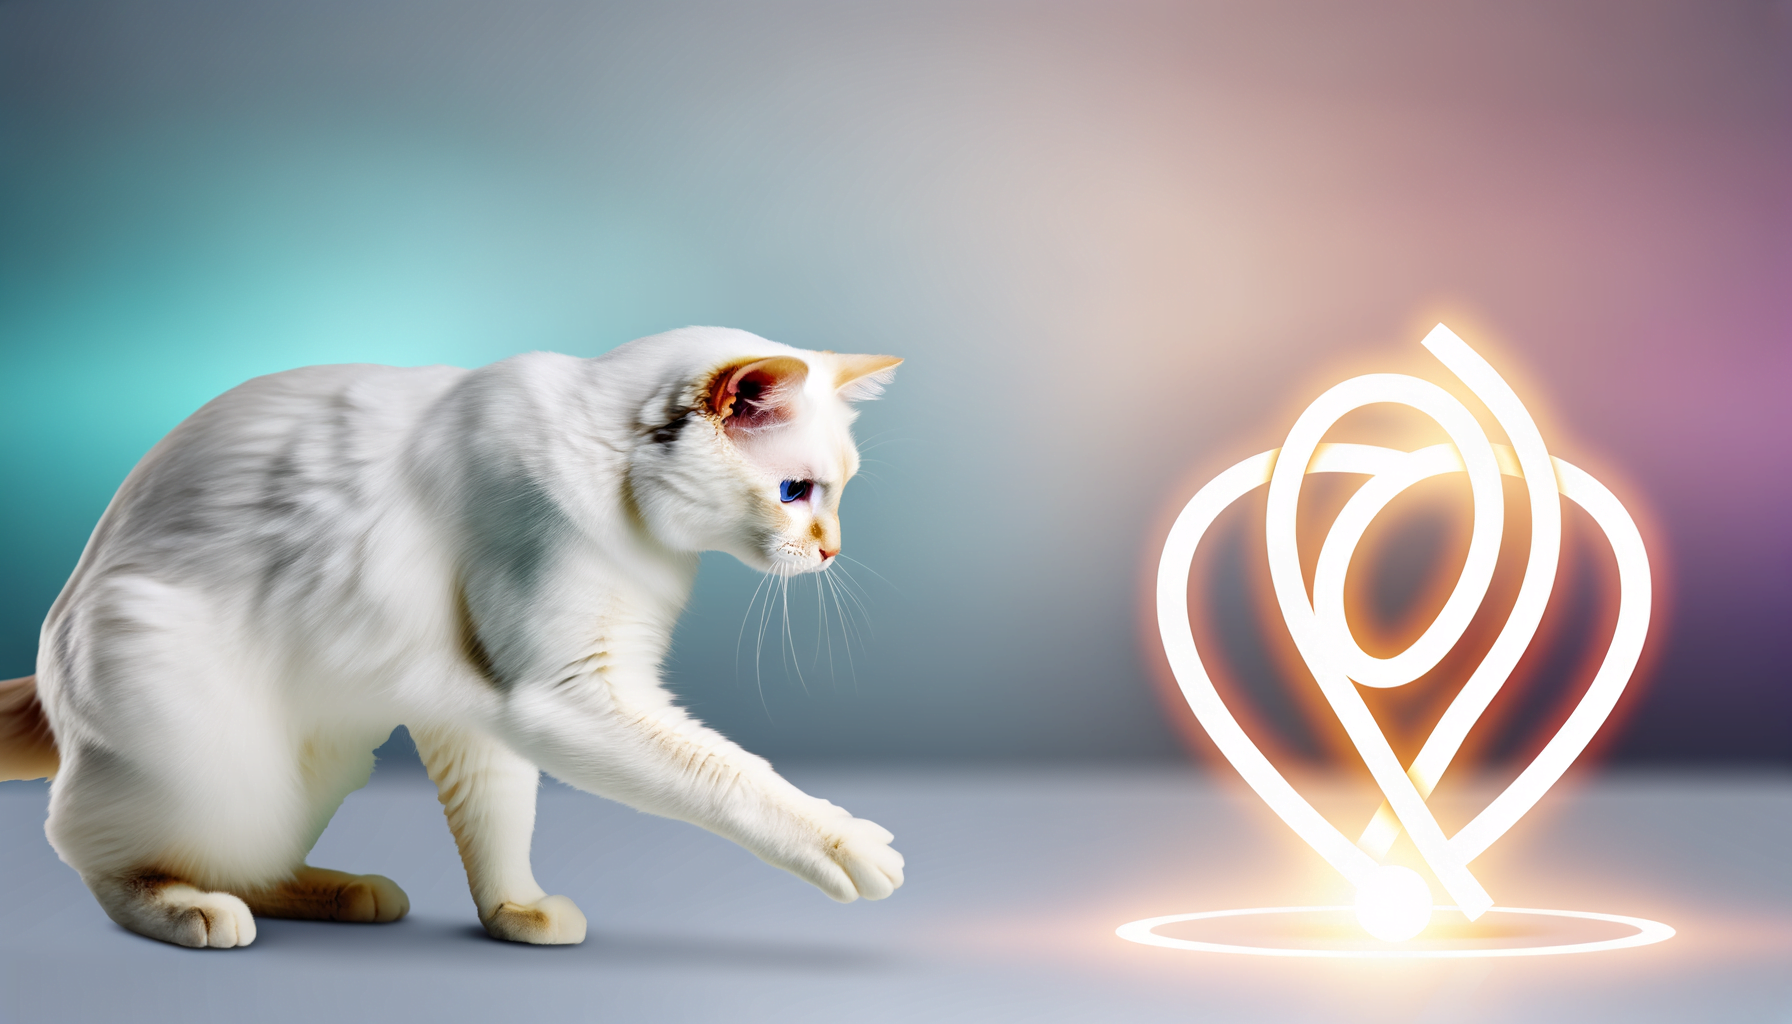 "Decoding the Health Mysteries: Are White Cats More Susceptible to Health Problems?"